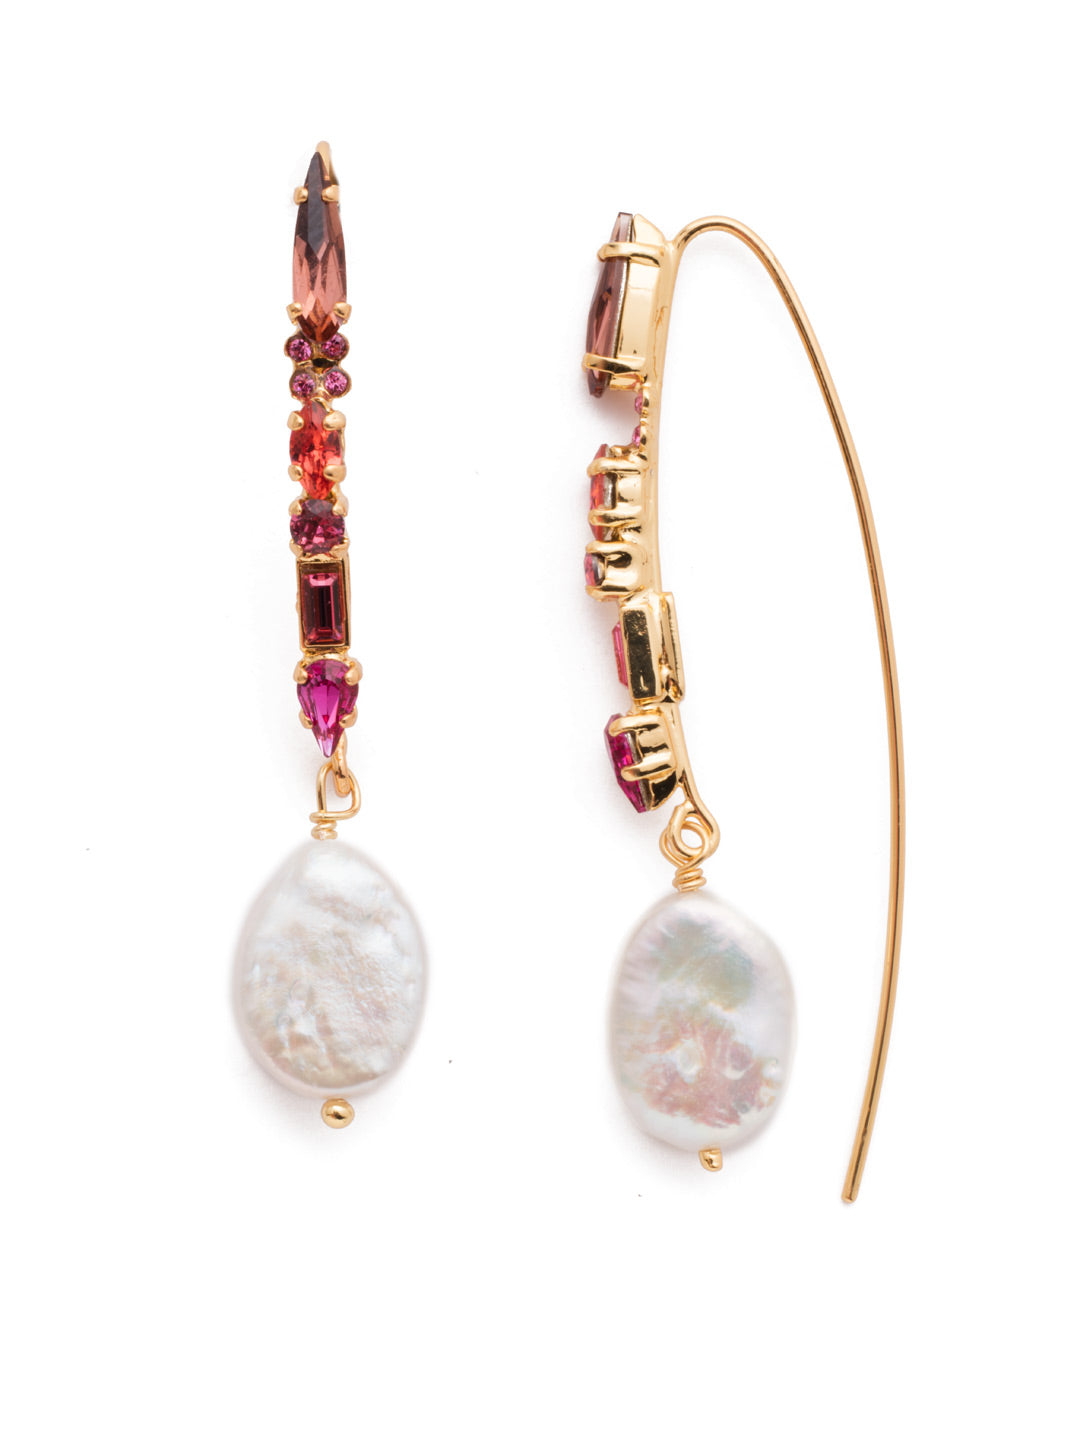 Paris Dangle Earrings - EES180BGBGA - Put on the Paris Dangle Earrings when you want to shine bright. Anchored by freshwater pearl pieces, these drip with sparkling crystals galore in baquette, navette, marquise and round shapes. They've got it all. From Sorrelli's Begonia collection in our Bright Gold-tone finish.